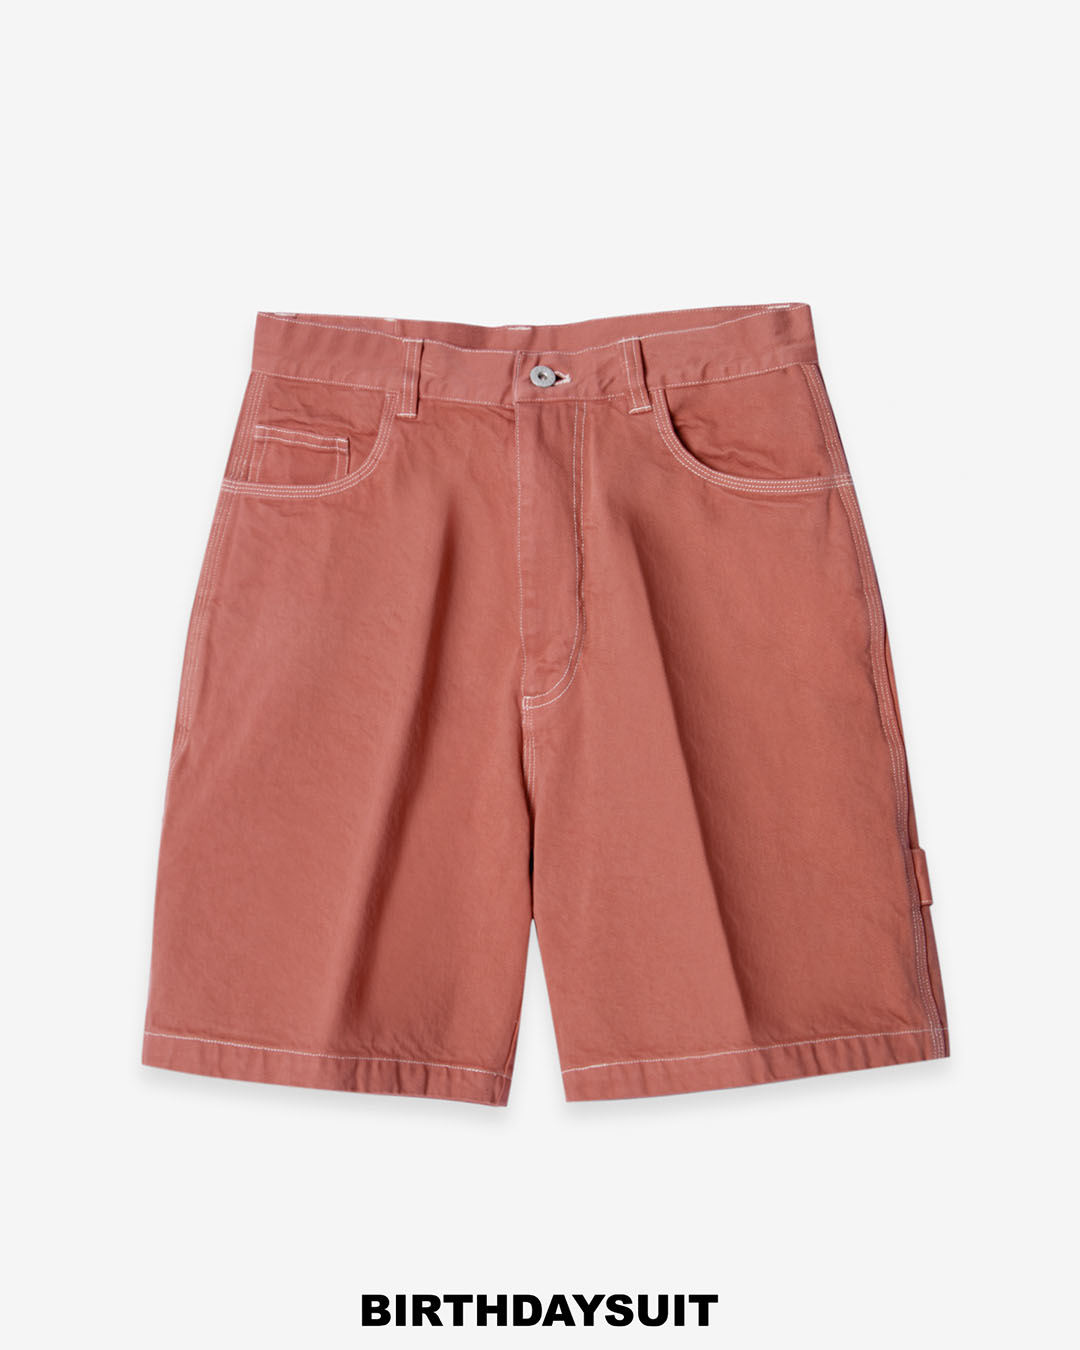 PAINTER SHORTS (PIGMENT RED)